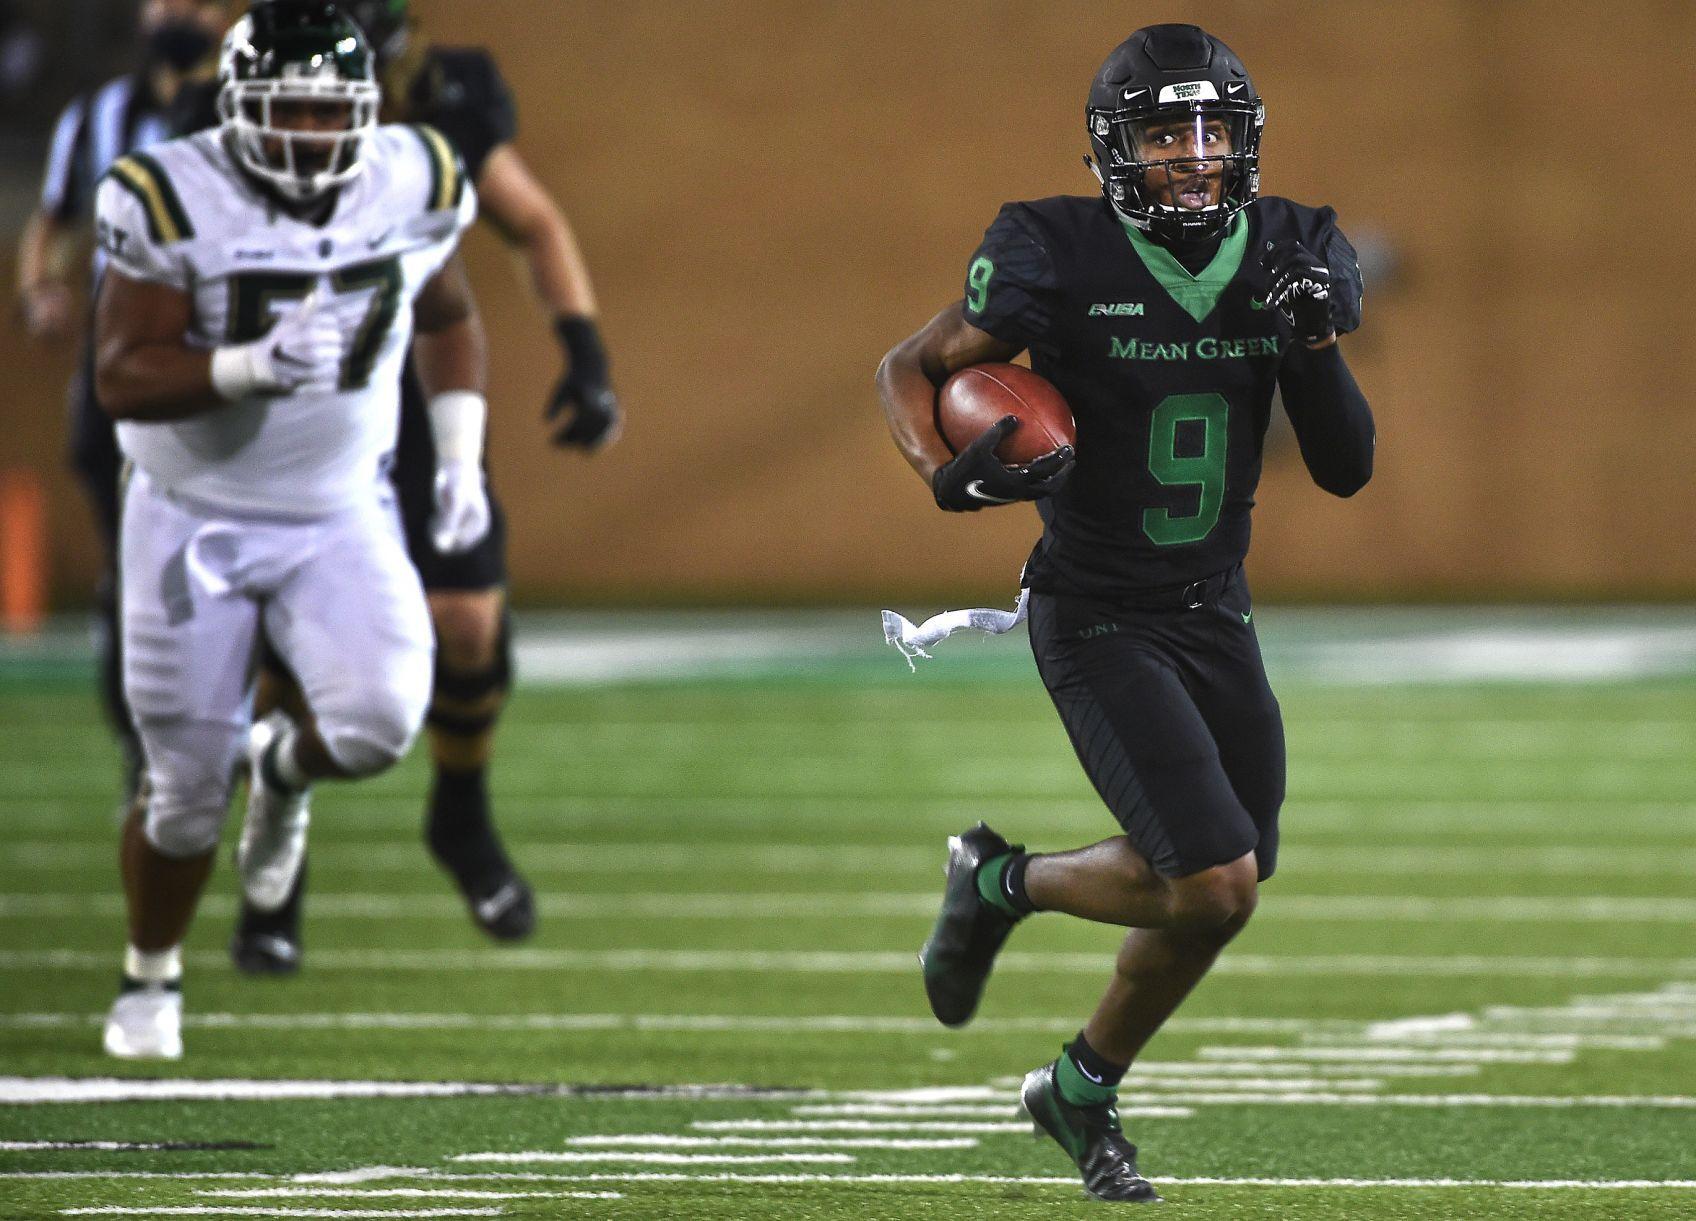 Star North Texas wide receiver Deonte Simpson dismissed from the football team after striking his girlfriend and hospitalizing her.